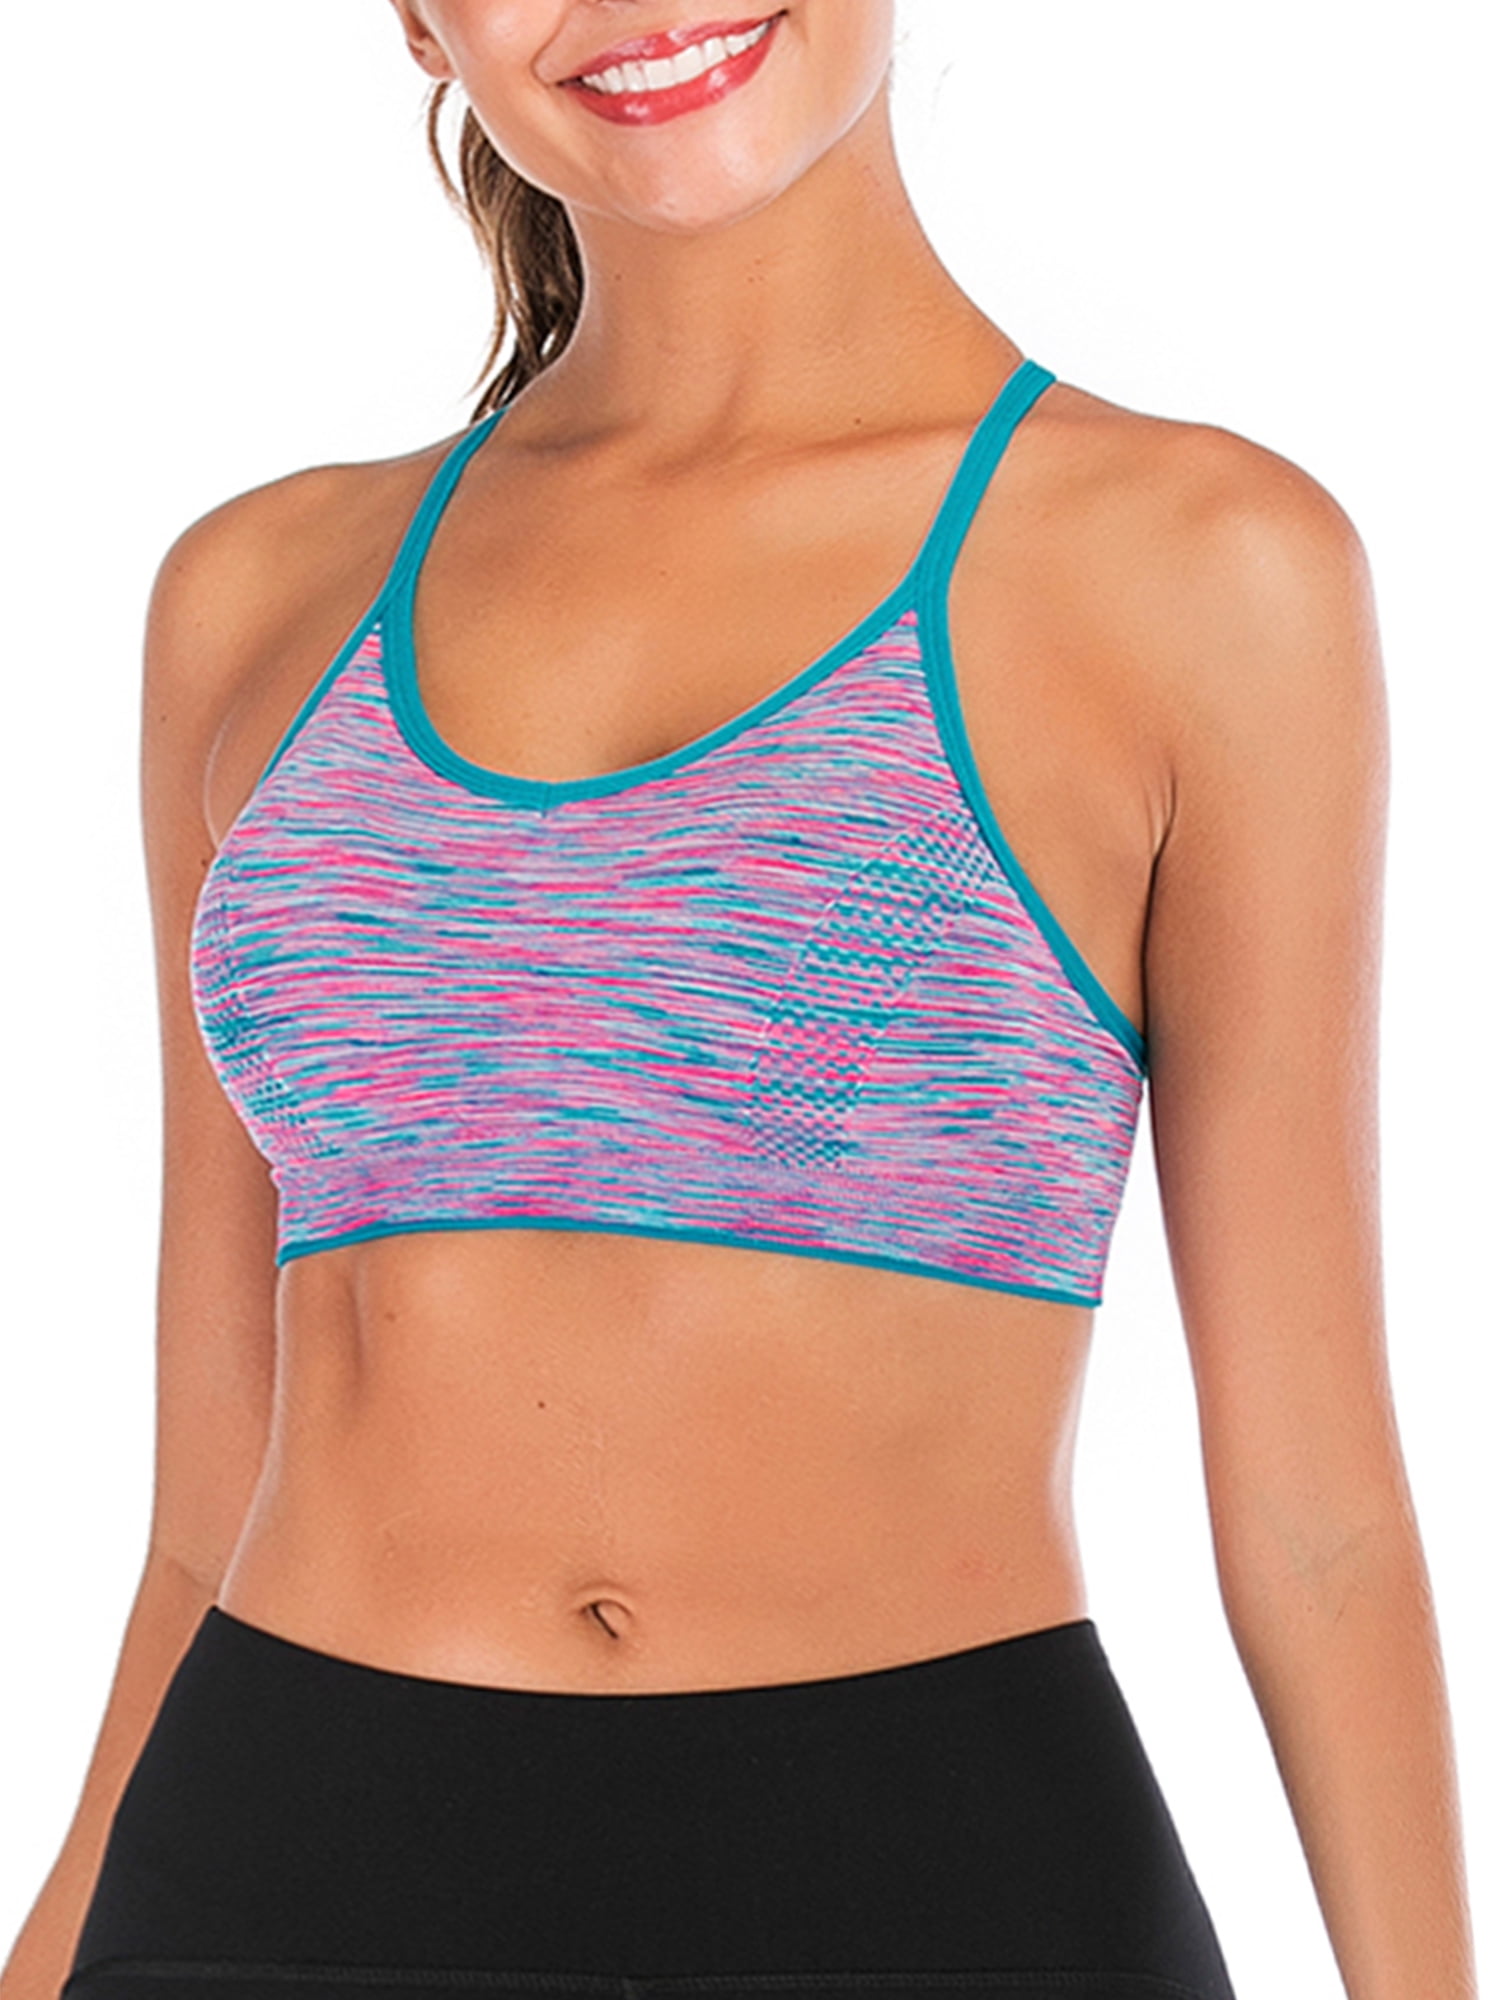 Details about   Women Sports Bras Tops Gym Activewear Yoga Training Fitness Energy Seamless Gym